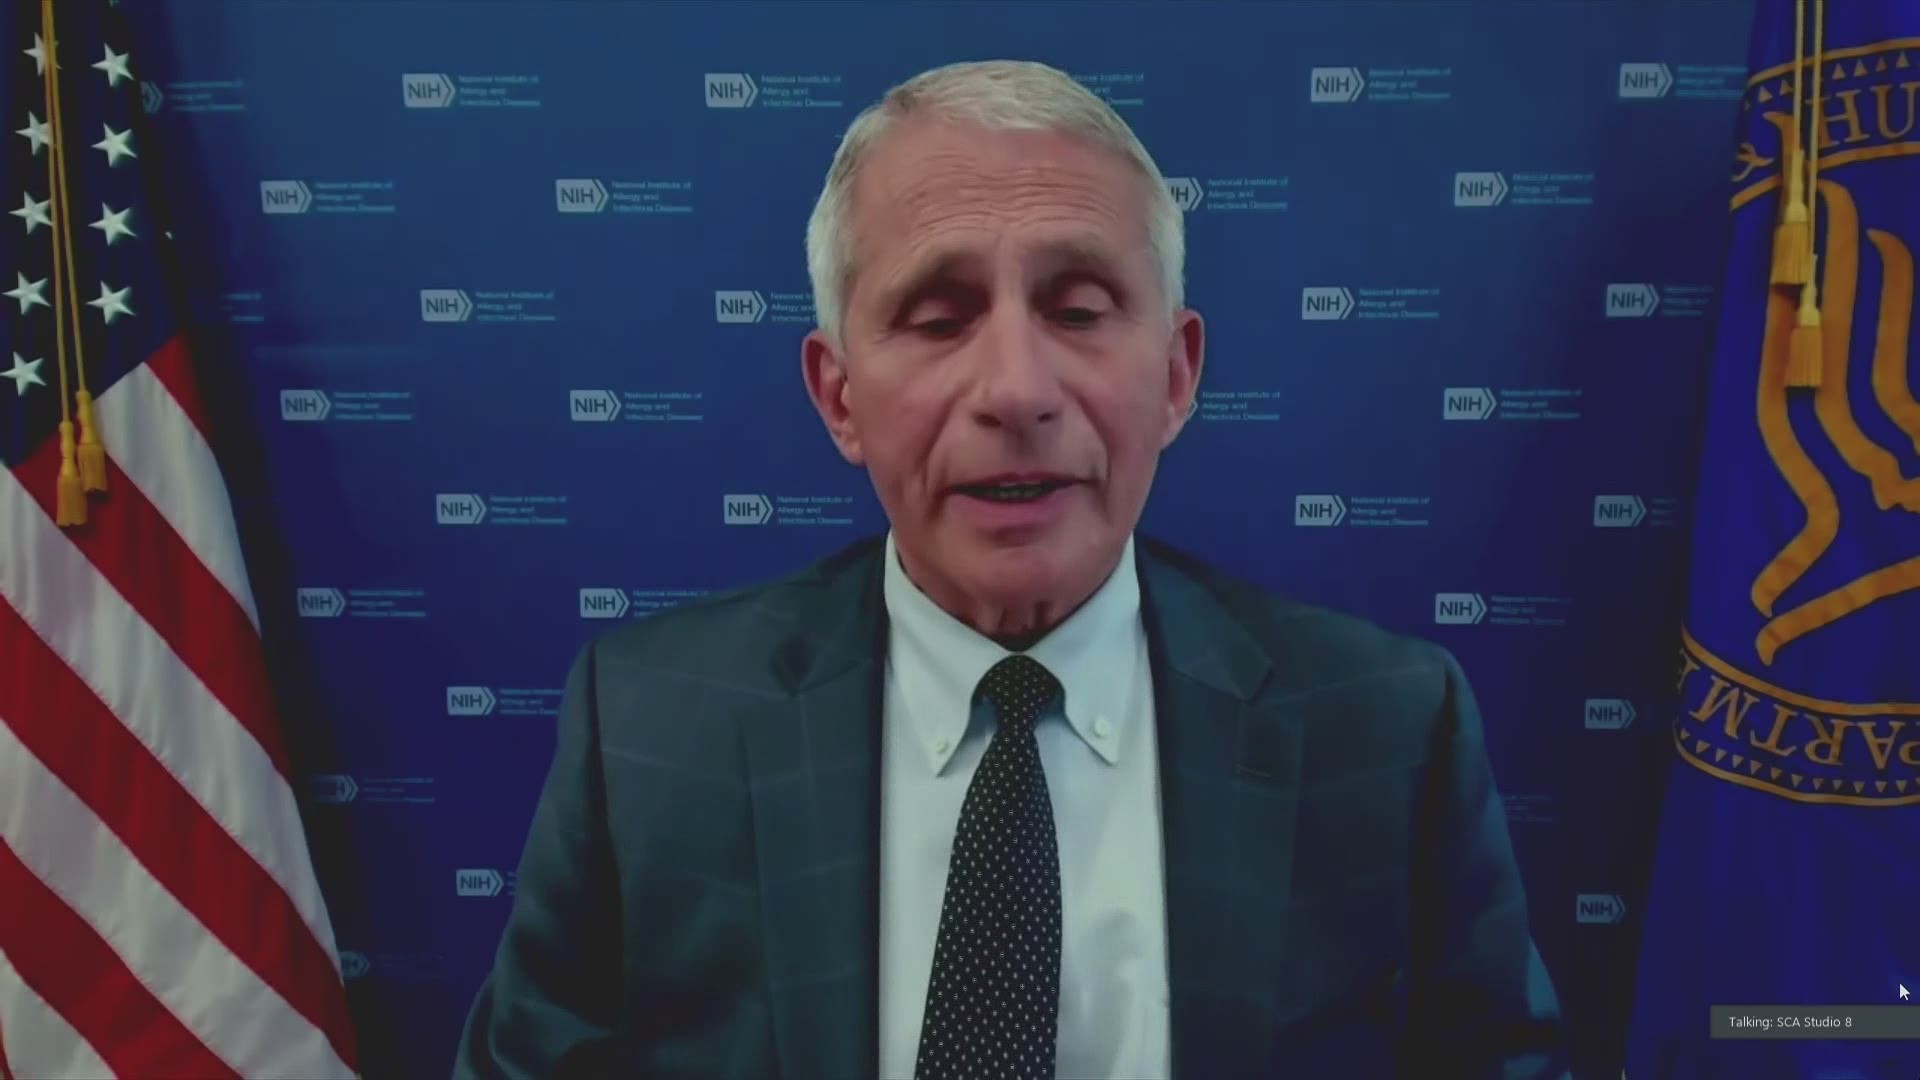 Dr. Anthony Fauci addresses the coronavirus pandemic during the White House COVID-19 Response Team briefing on July 22, 2021.